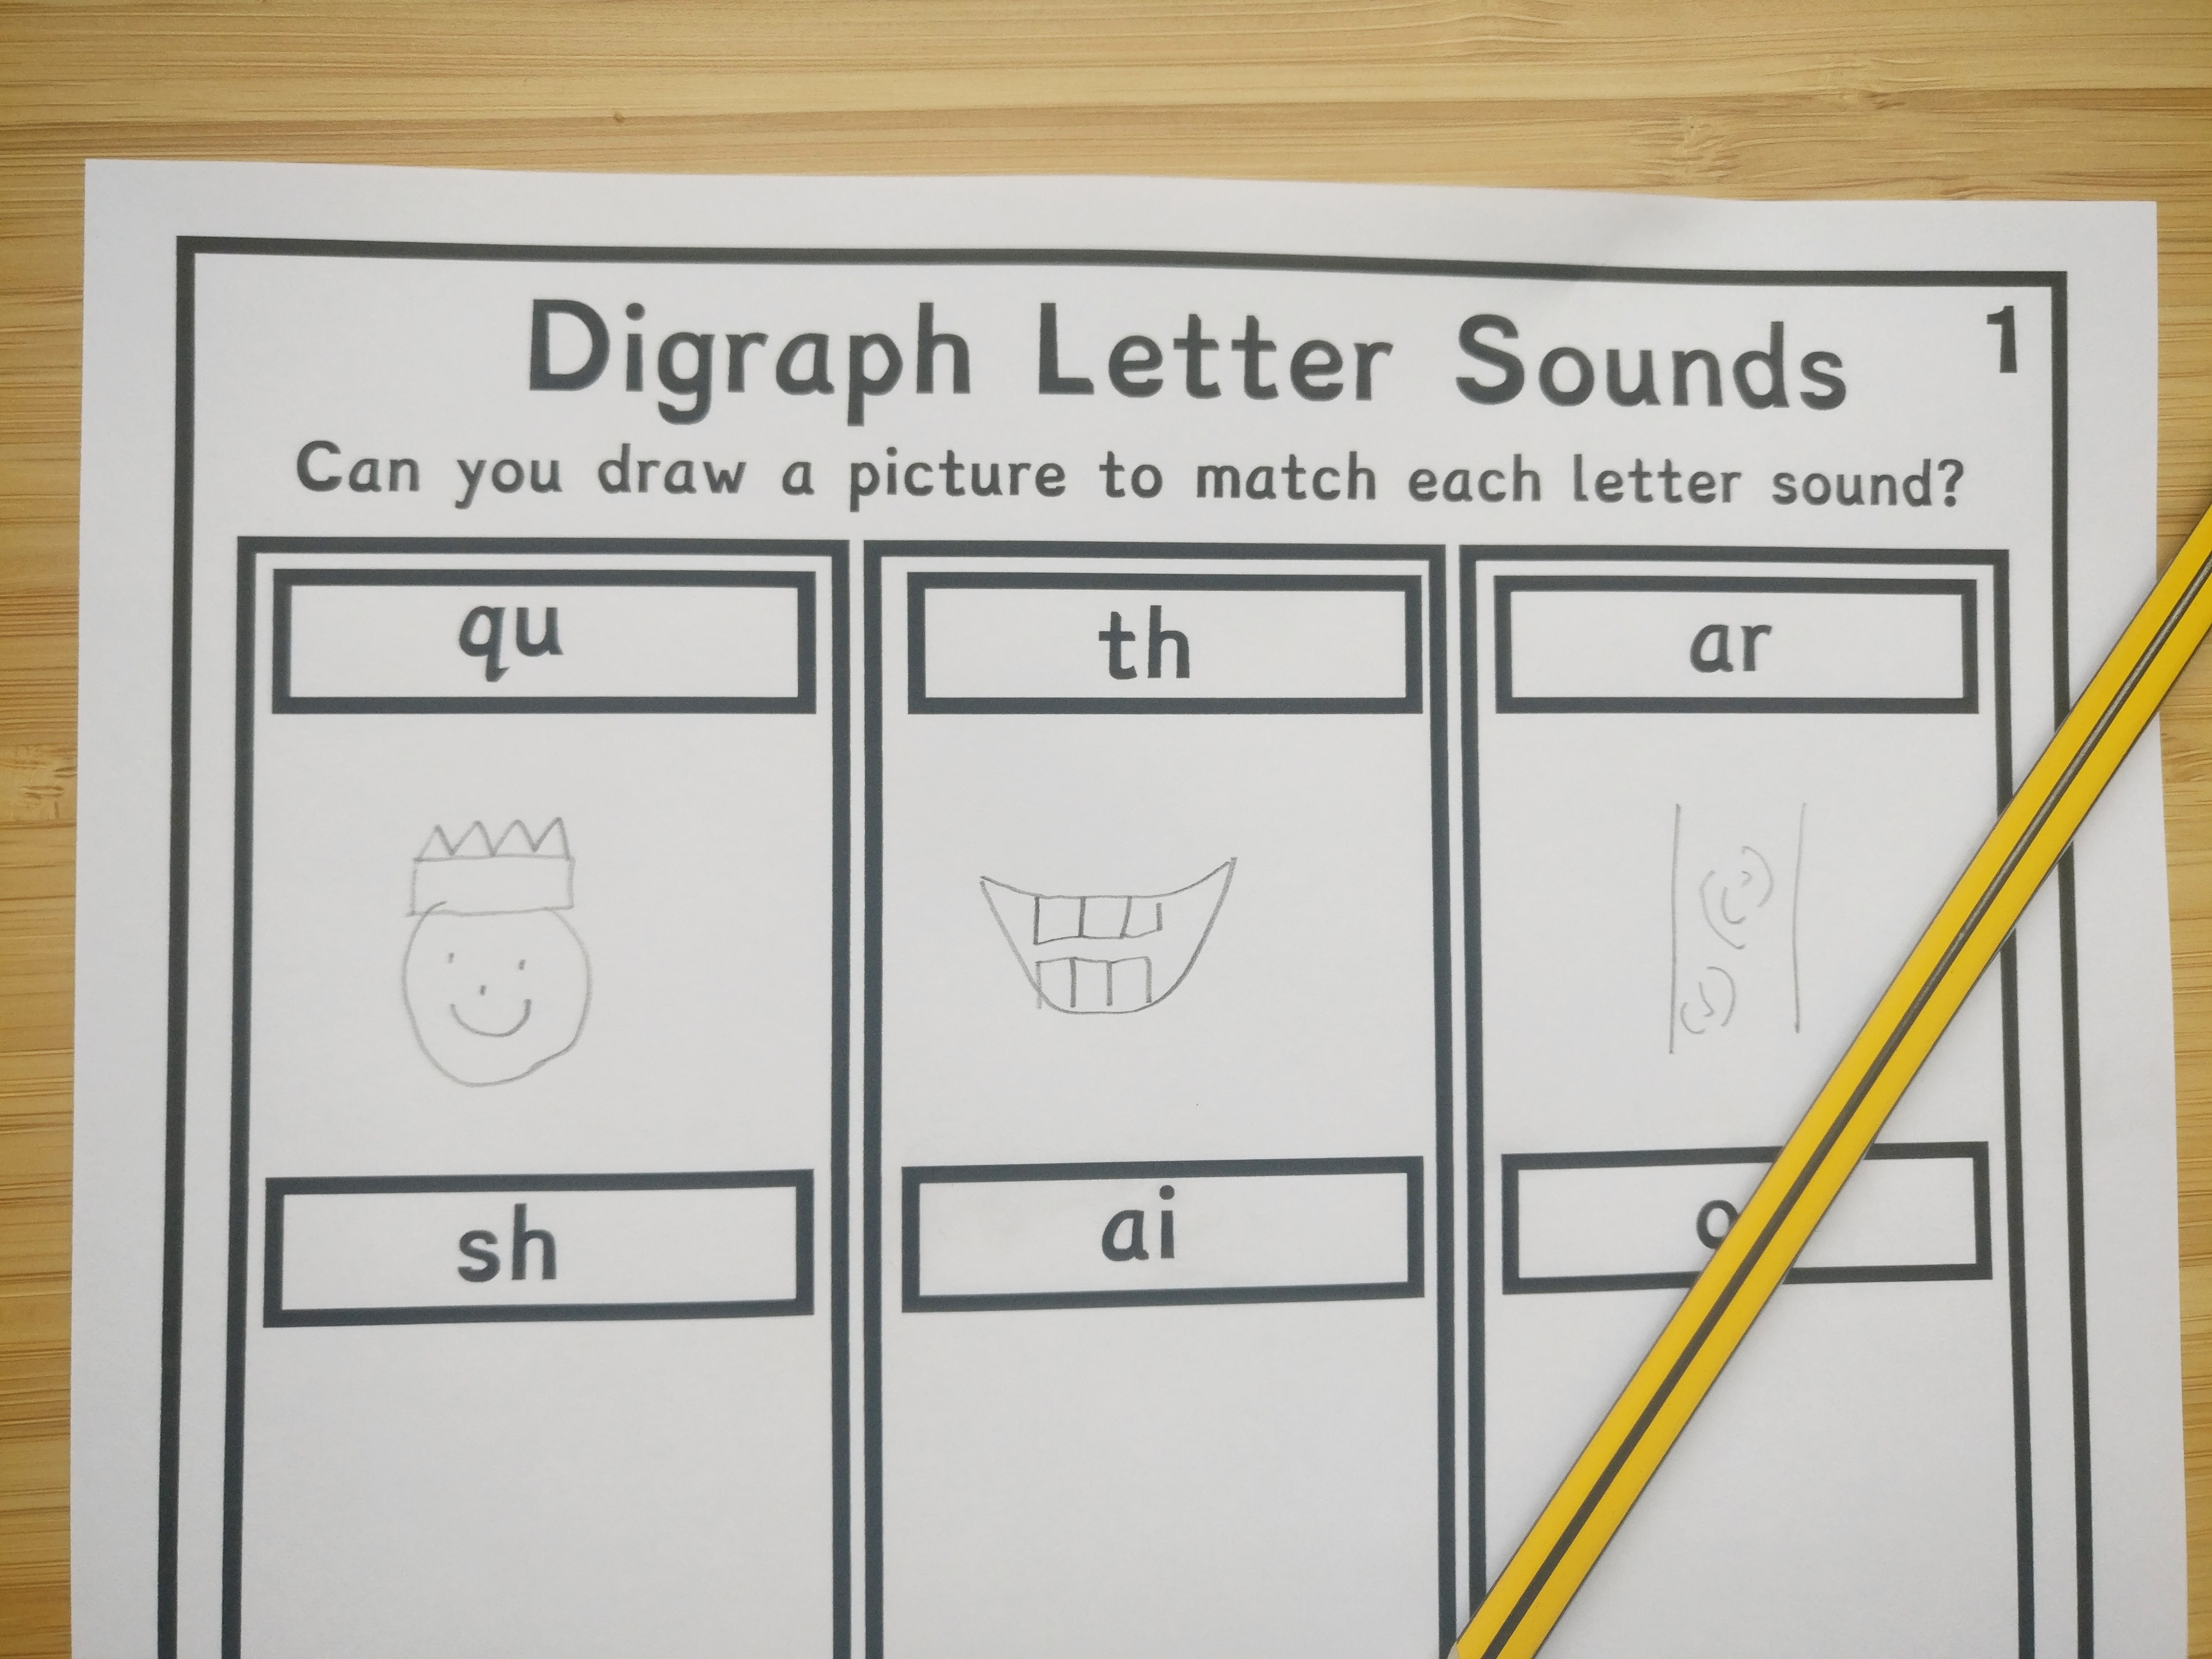 Draw a Picture to Match the Sound